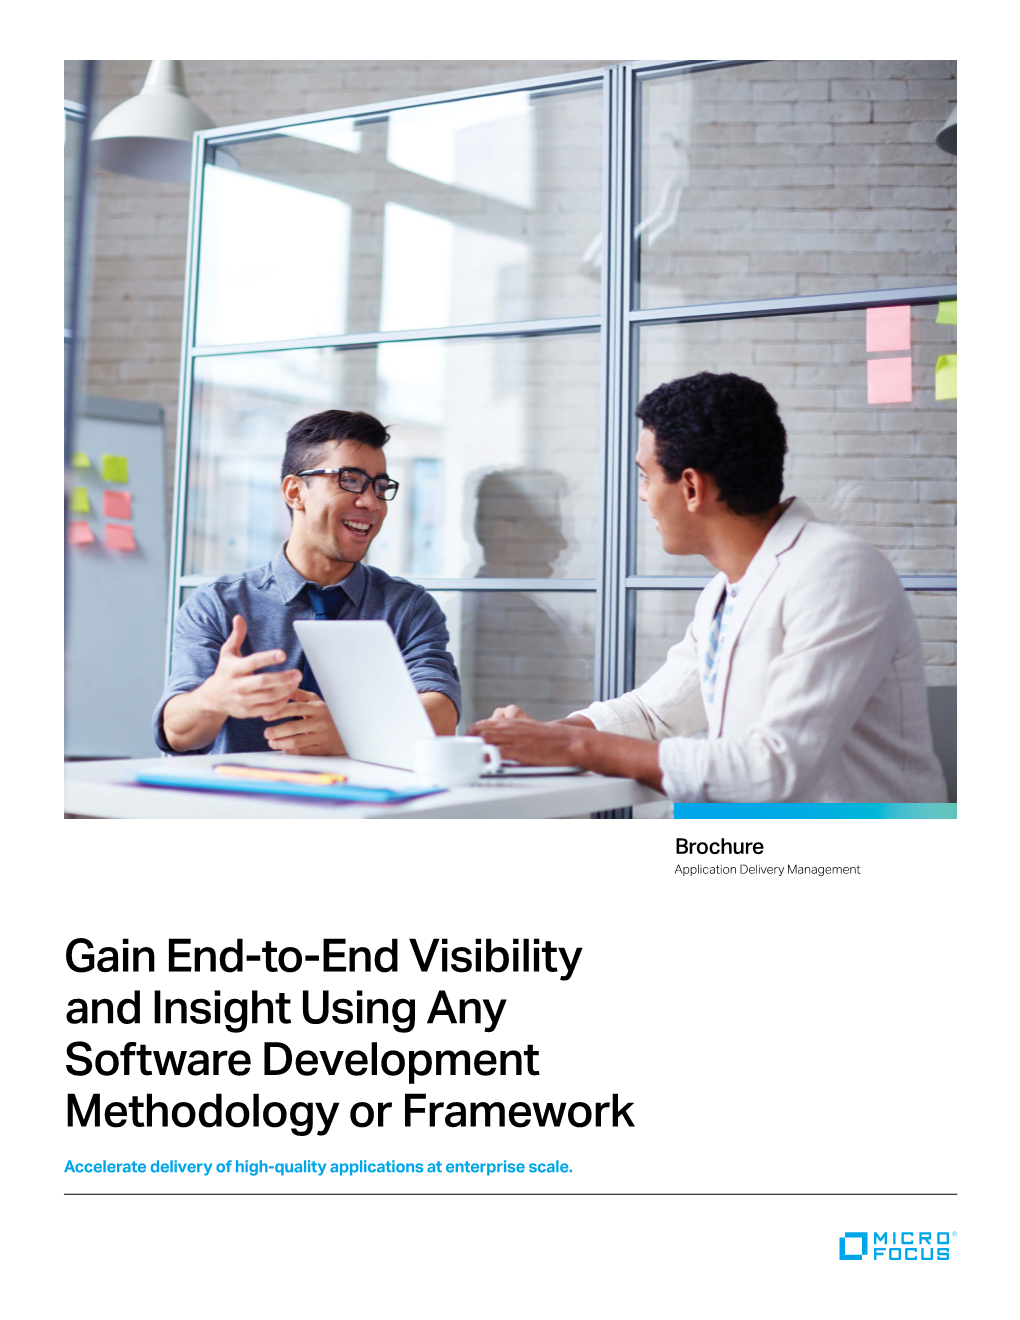 Gain End-To-End Visibility and Insight Using Any Software Development Methodology Or Framework